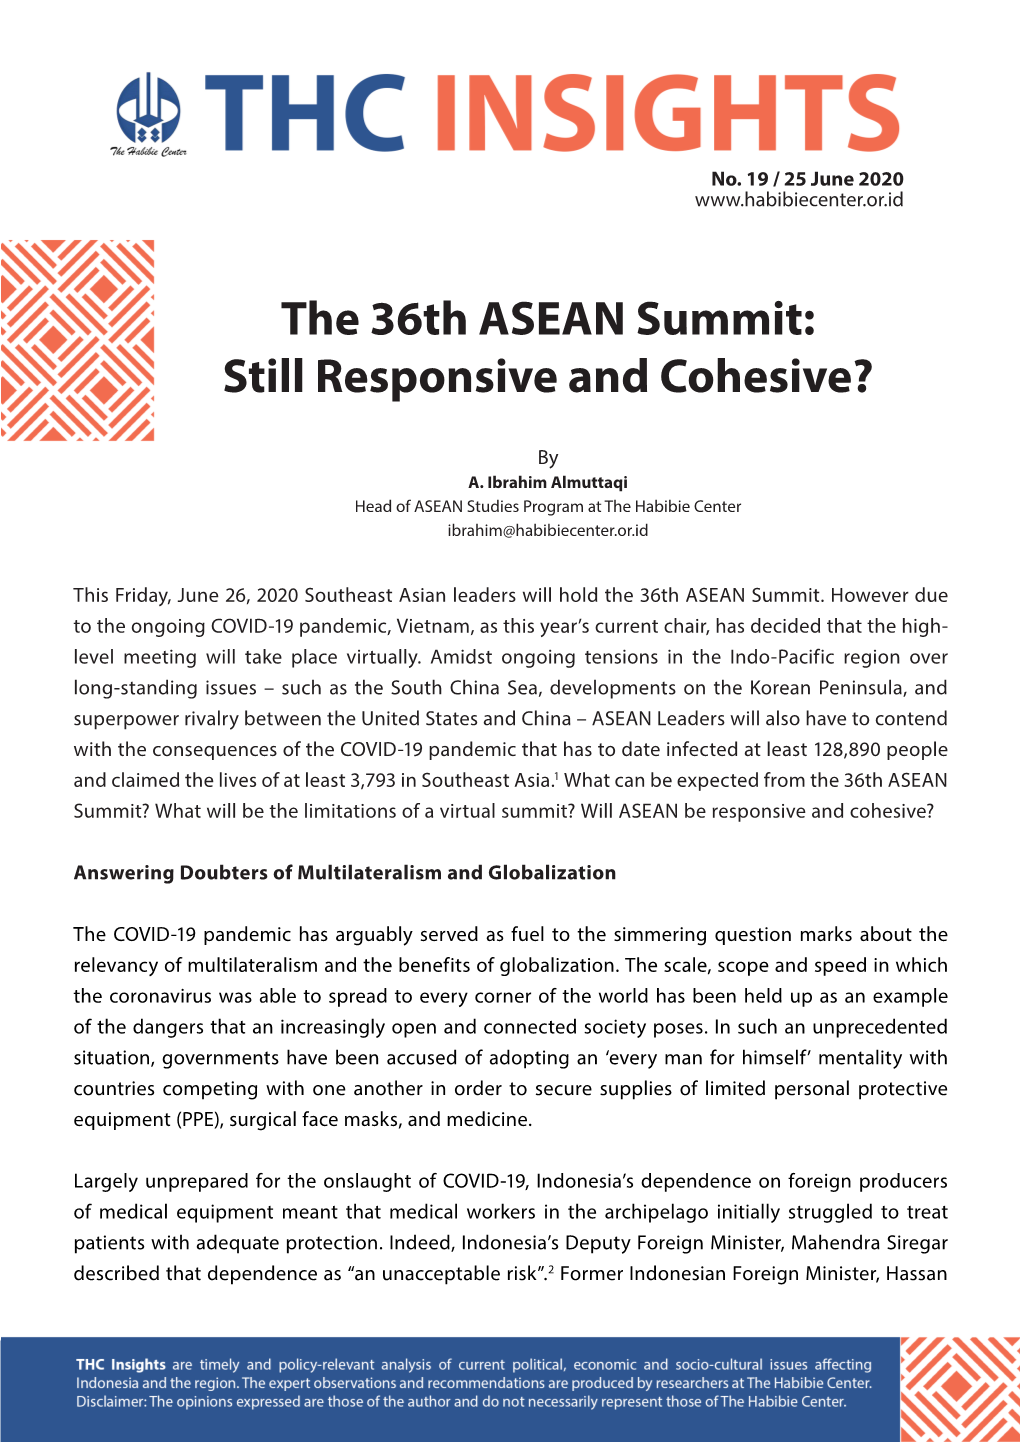 The 36Th ASEAN Summit: Still Responsive and Cohesive?